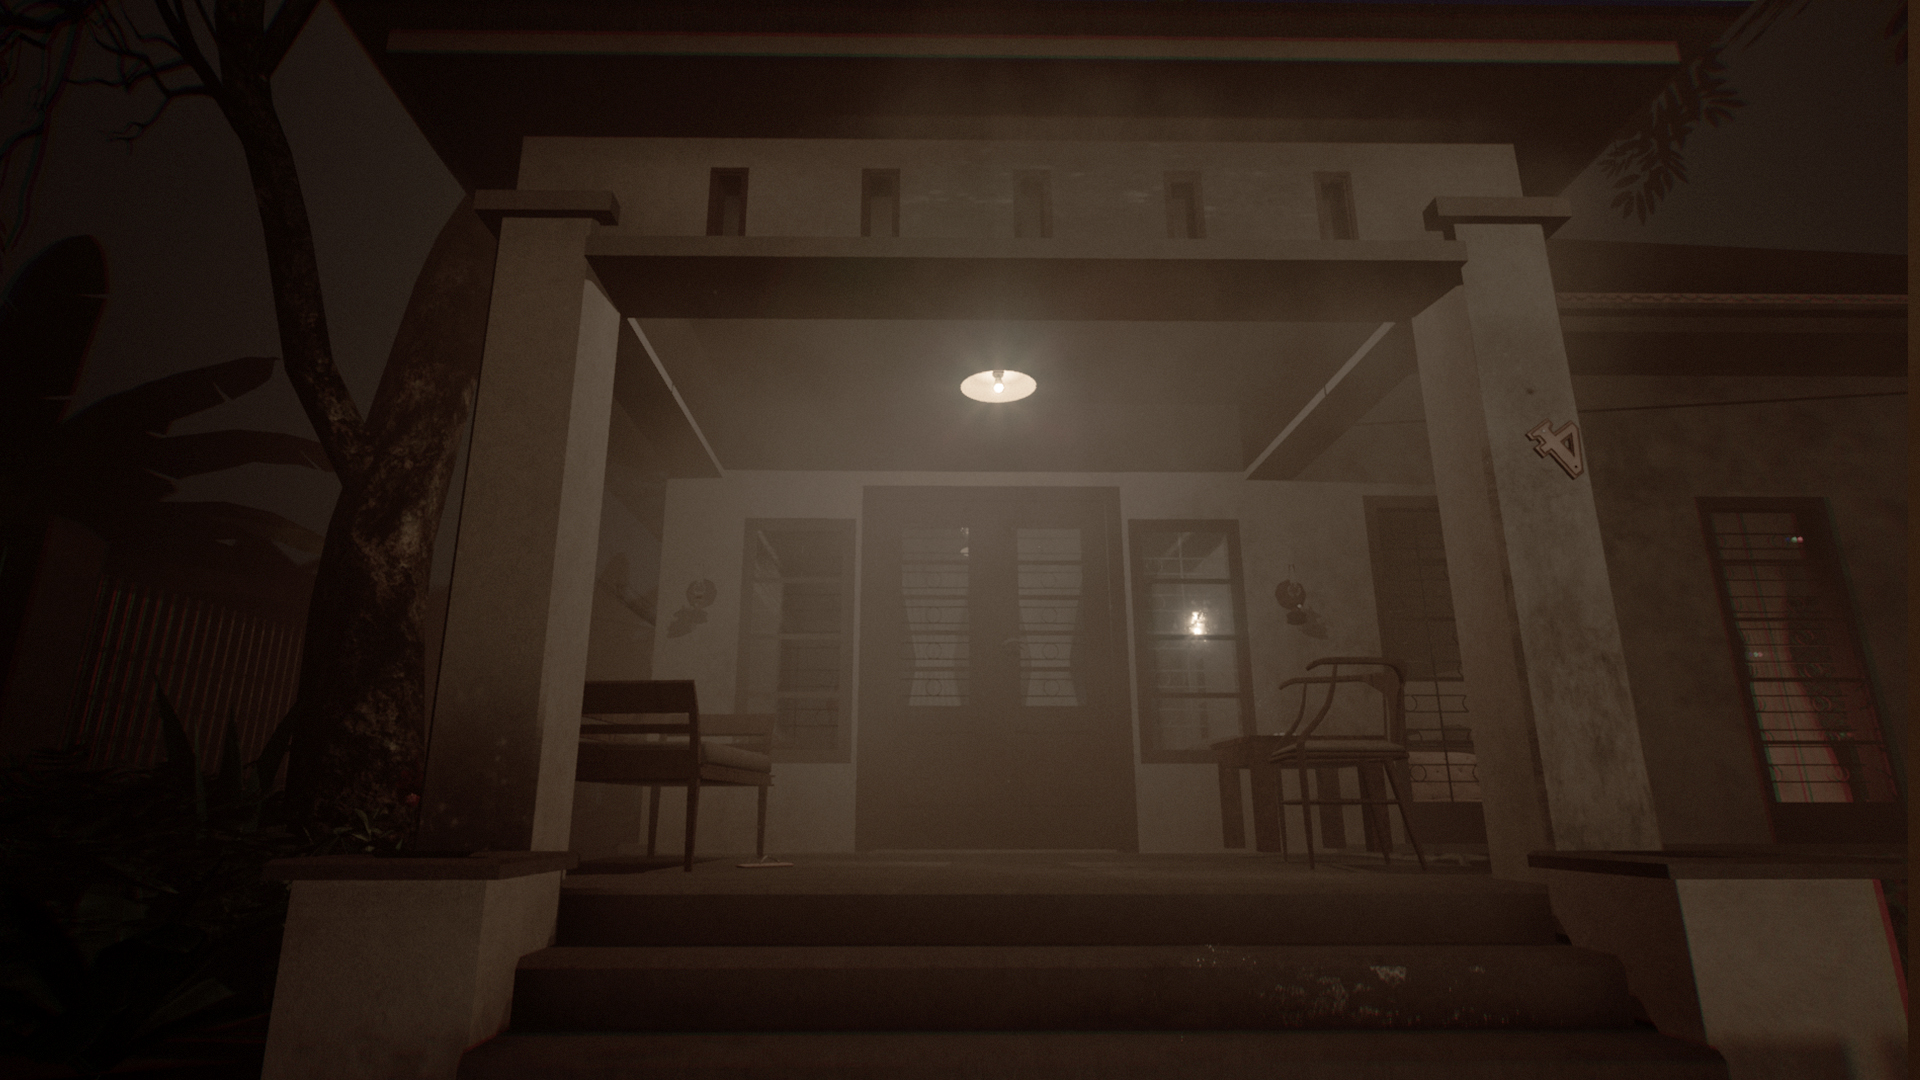 Pamali is a horror game based on Indonesian folklore